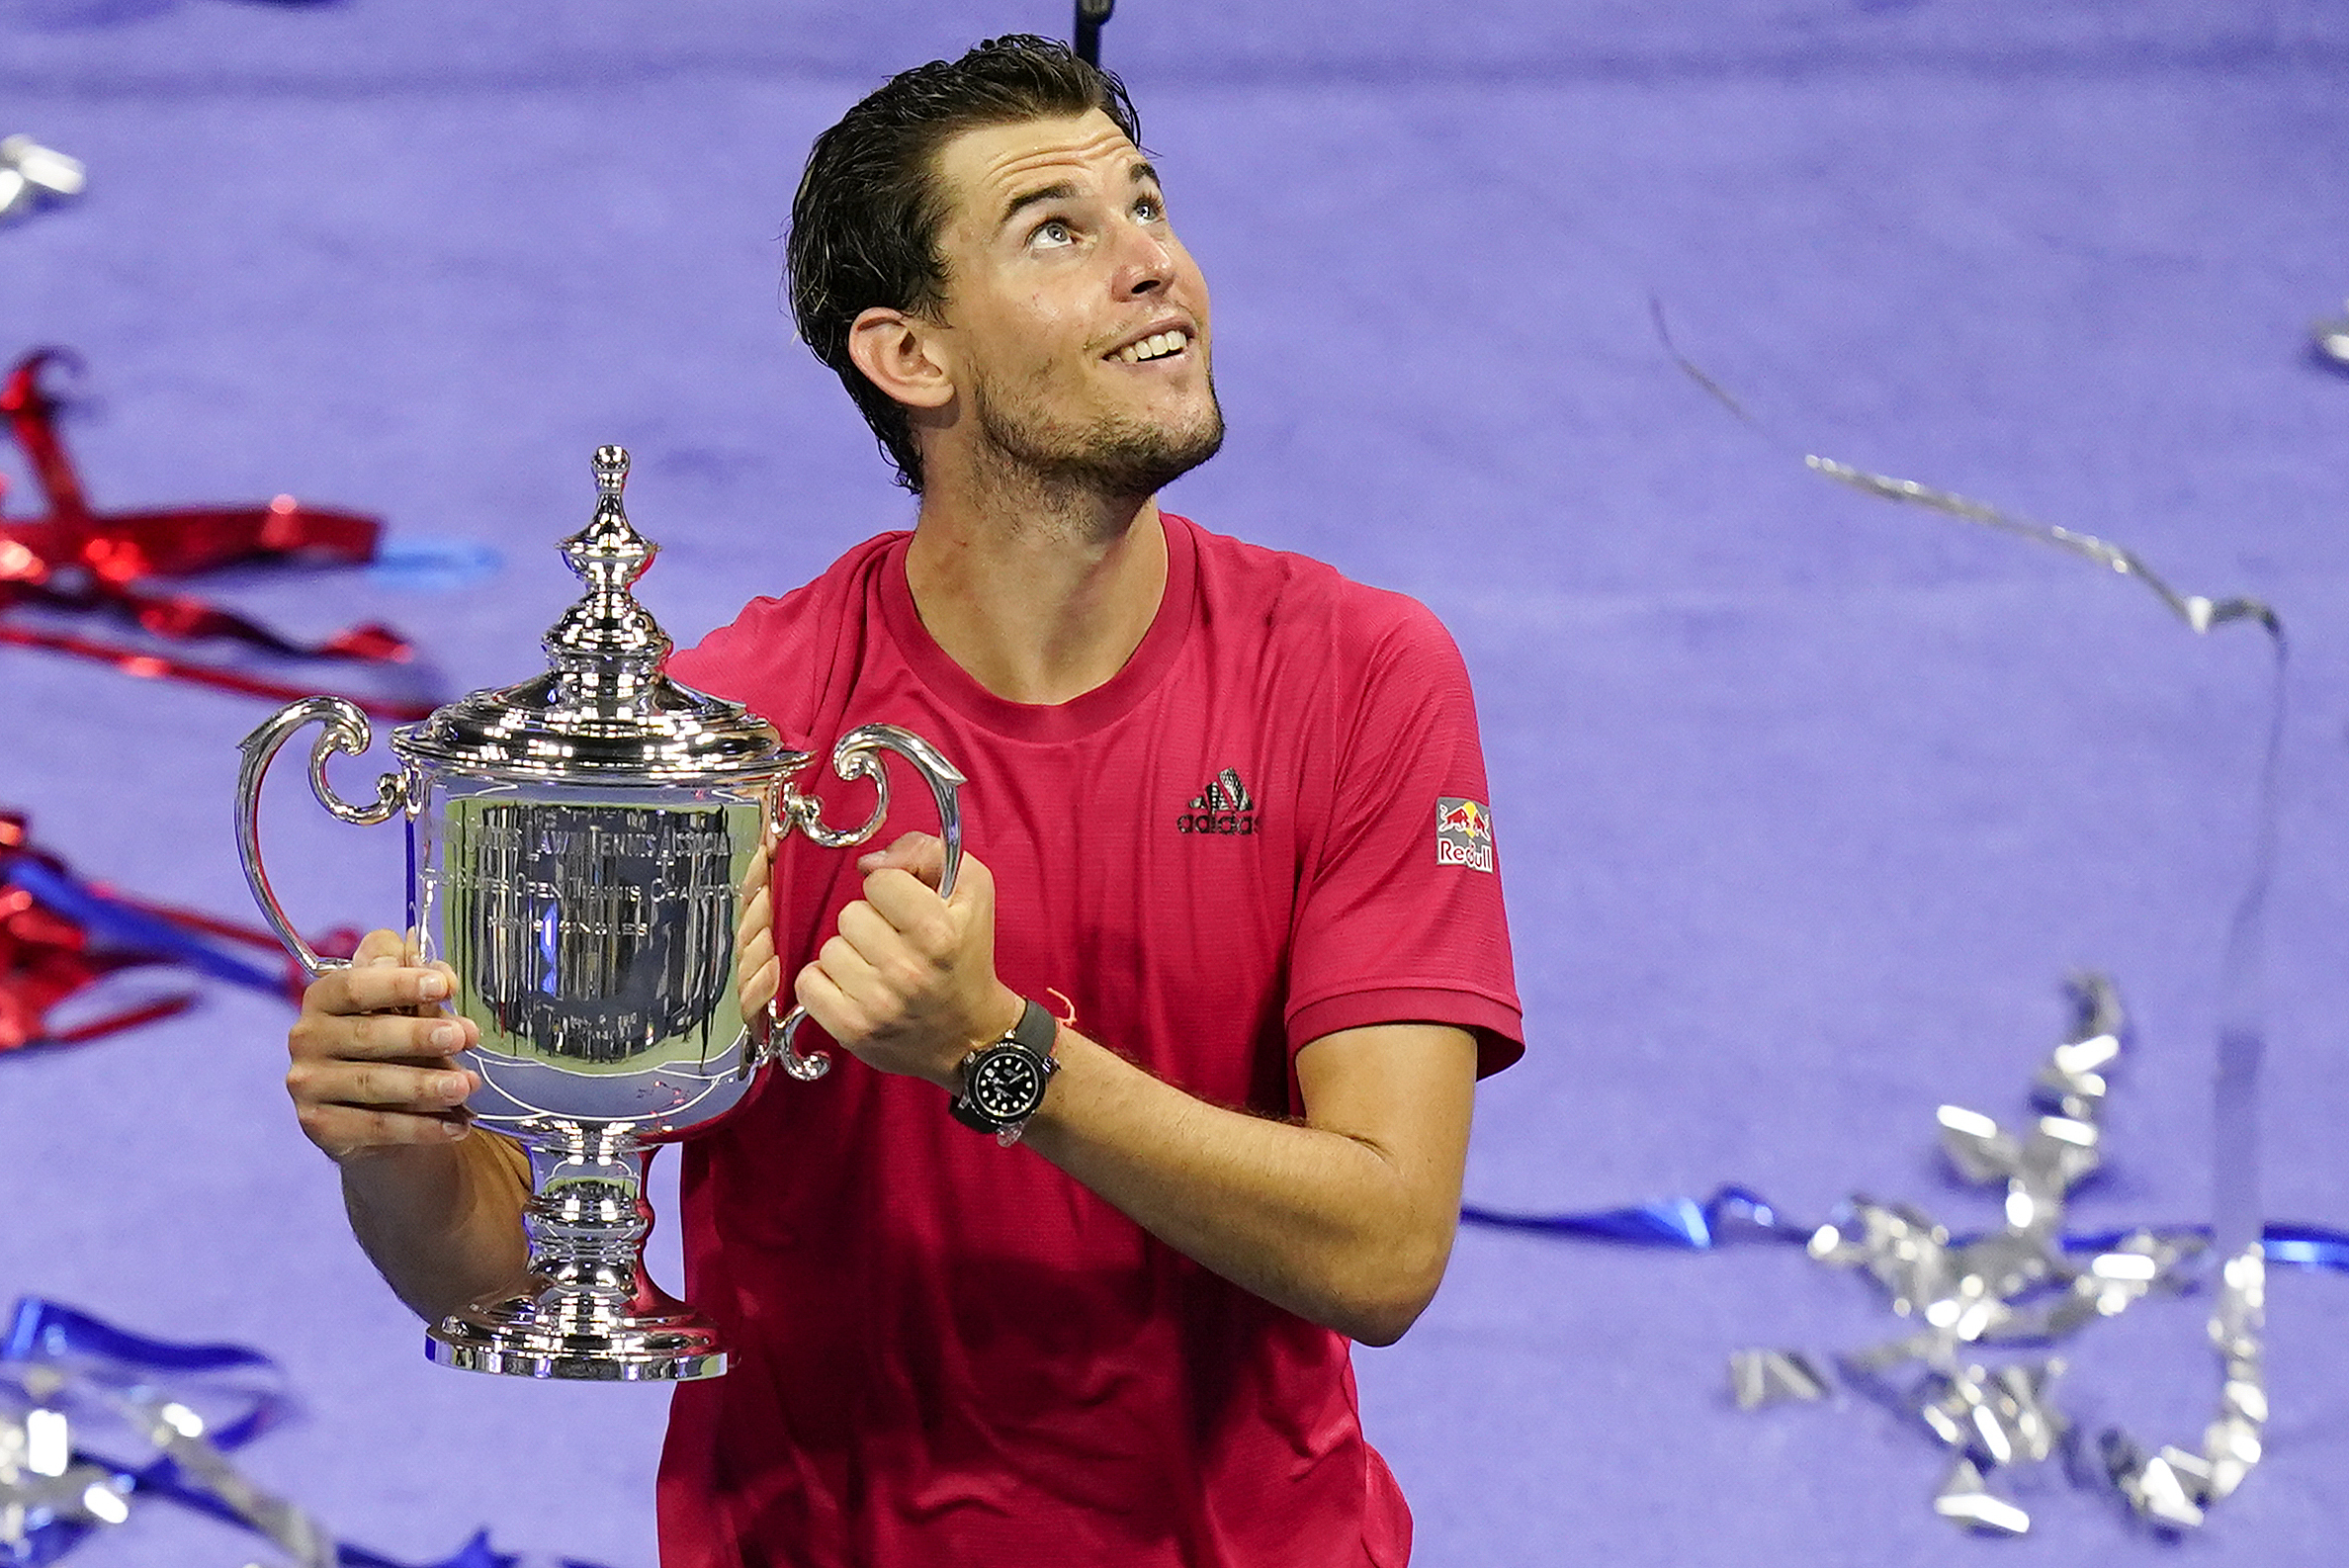 Dominic Thiem 1st since 1949 to win US Open after ceding 1st 2 sets